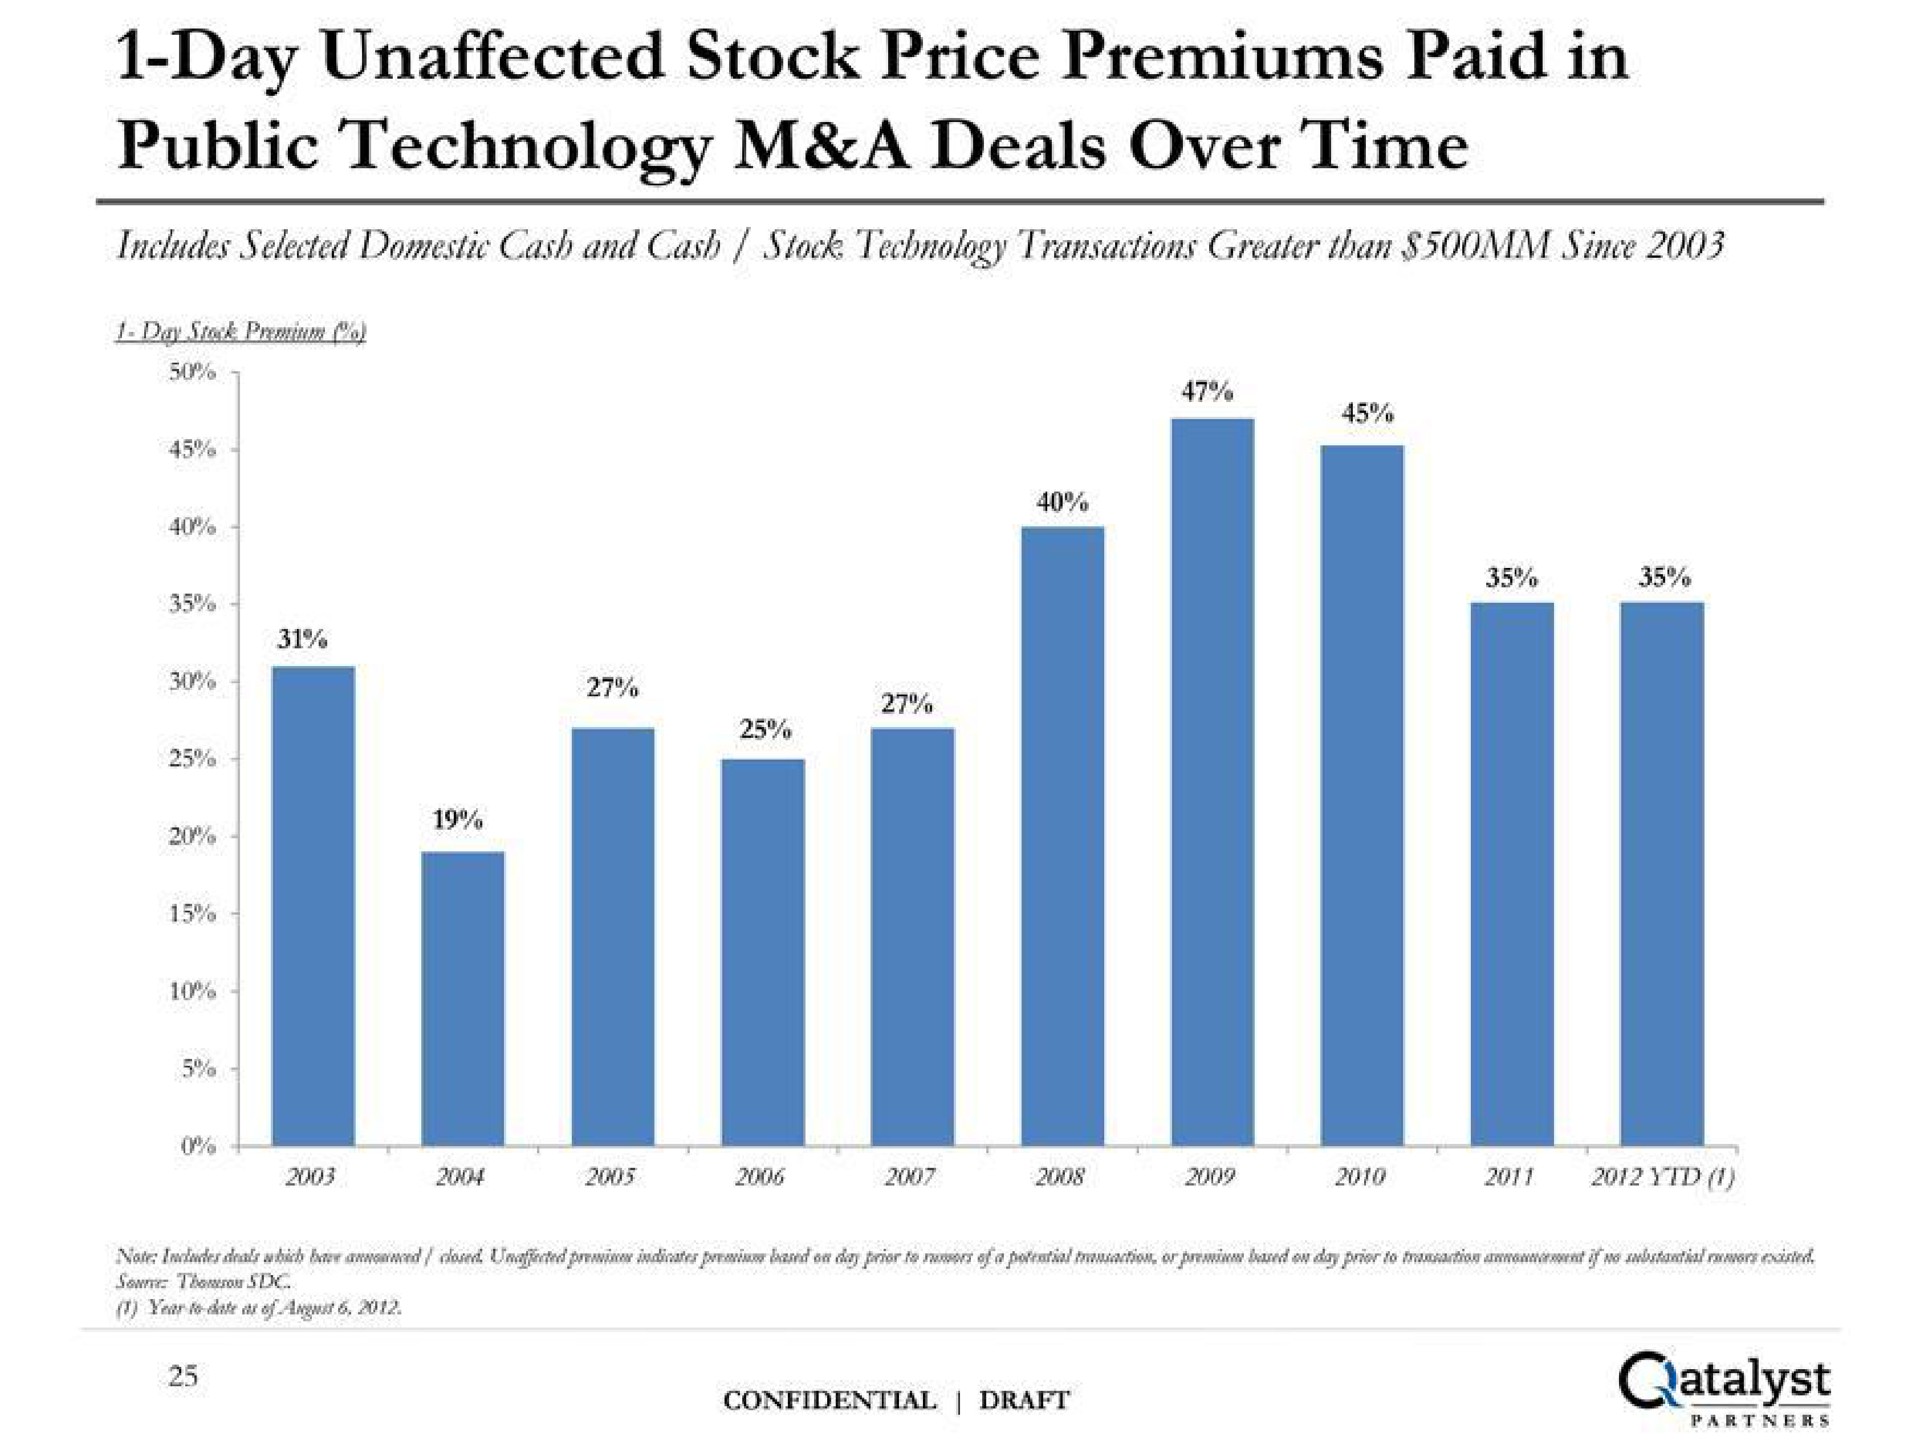 day unaffected stock price premiums paid in public technology a deals over time | Qatalyst Partners